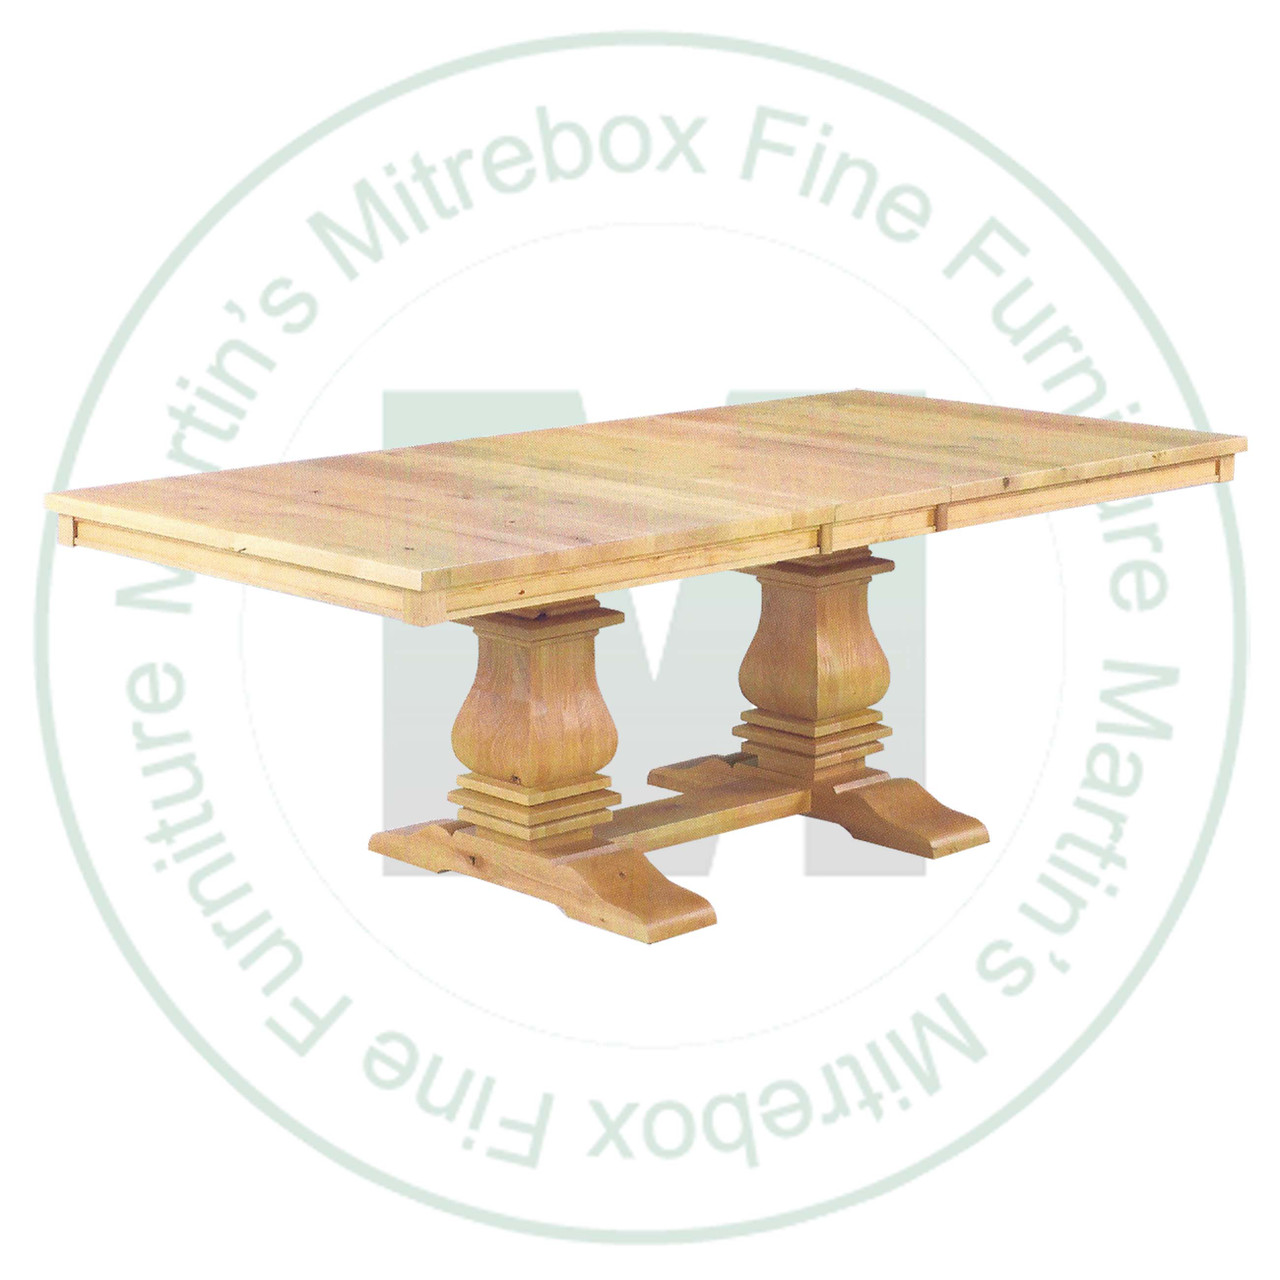 Maple Mediterranean Double Pedestal Table 48''D x 84''W x 30''H With 3 - 12'' Leaves. Table Has 1.25'' Thick Top